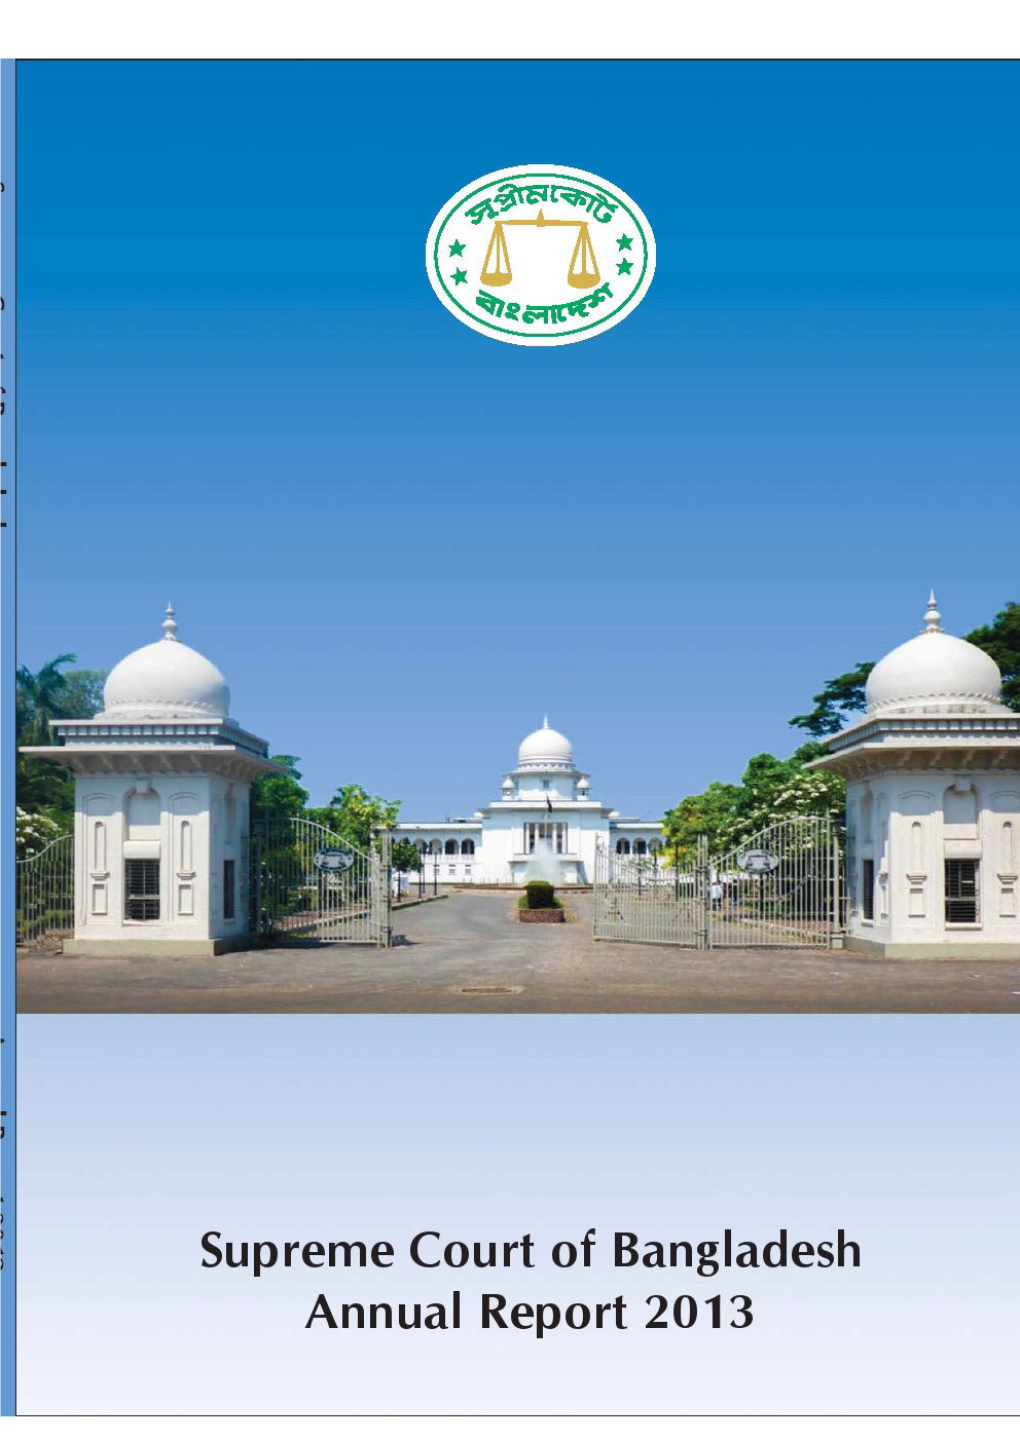 Annual Report 2013 Architectural View of the Supreme Court Main Building (Original) SUPREME COURT of BANGLADESH